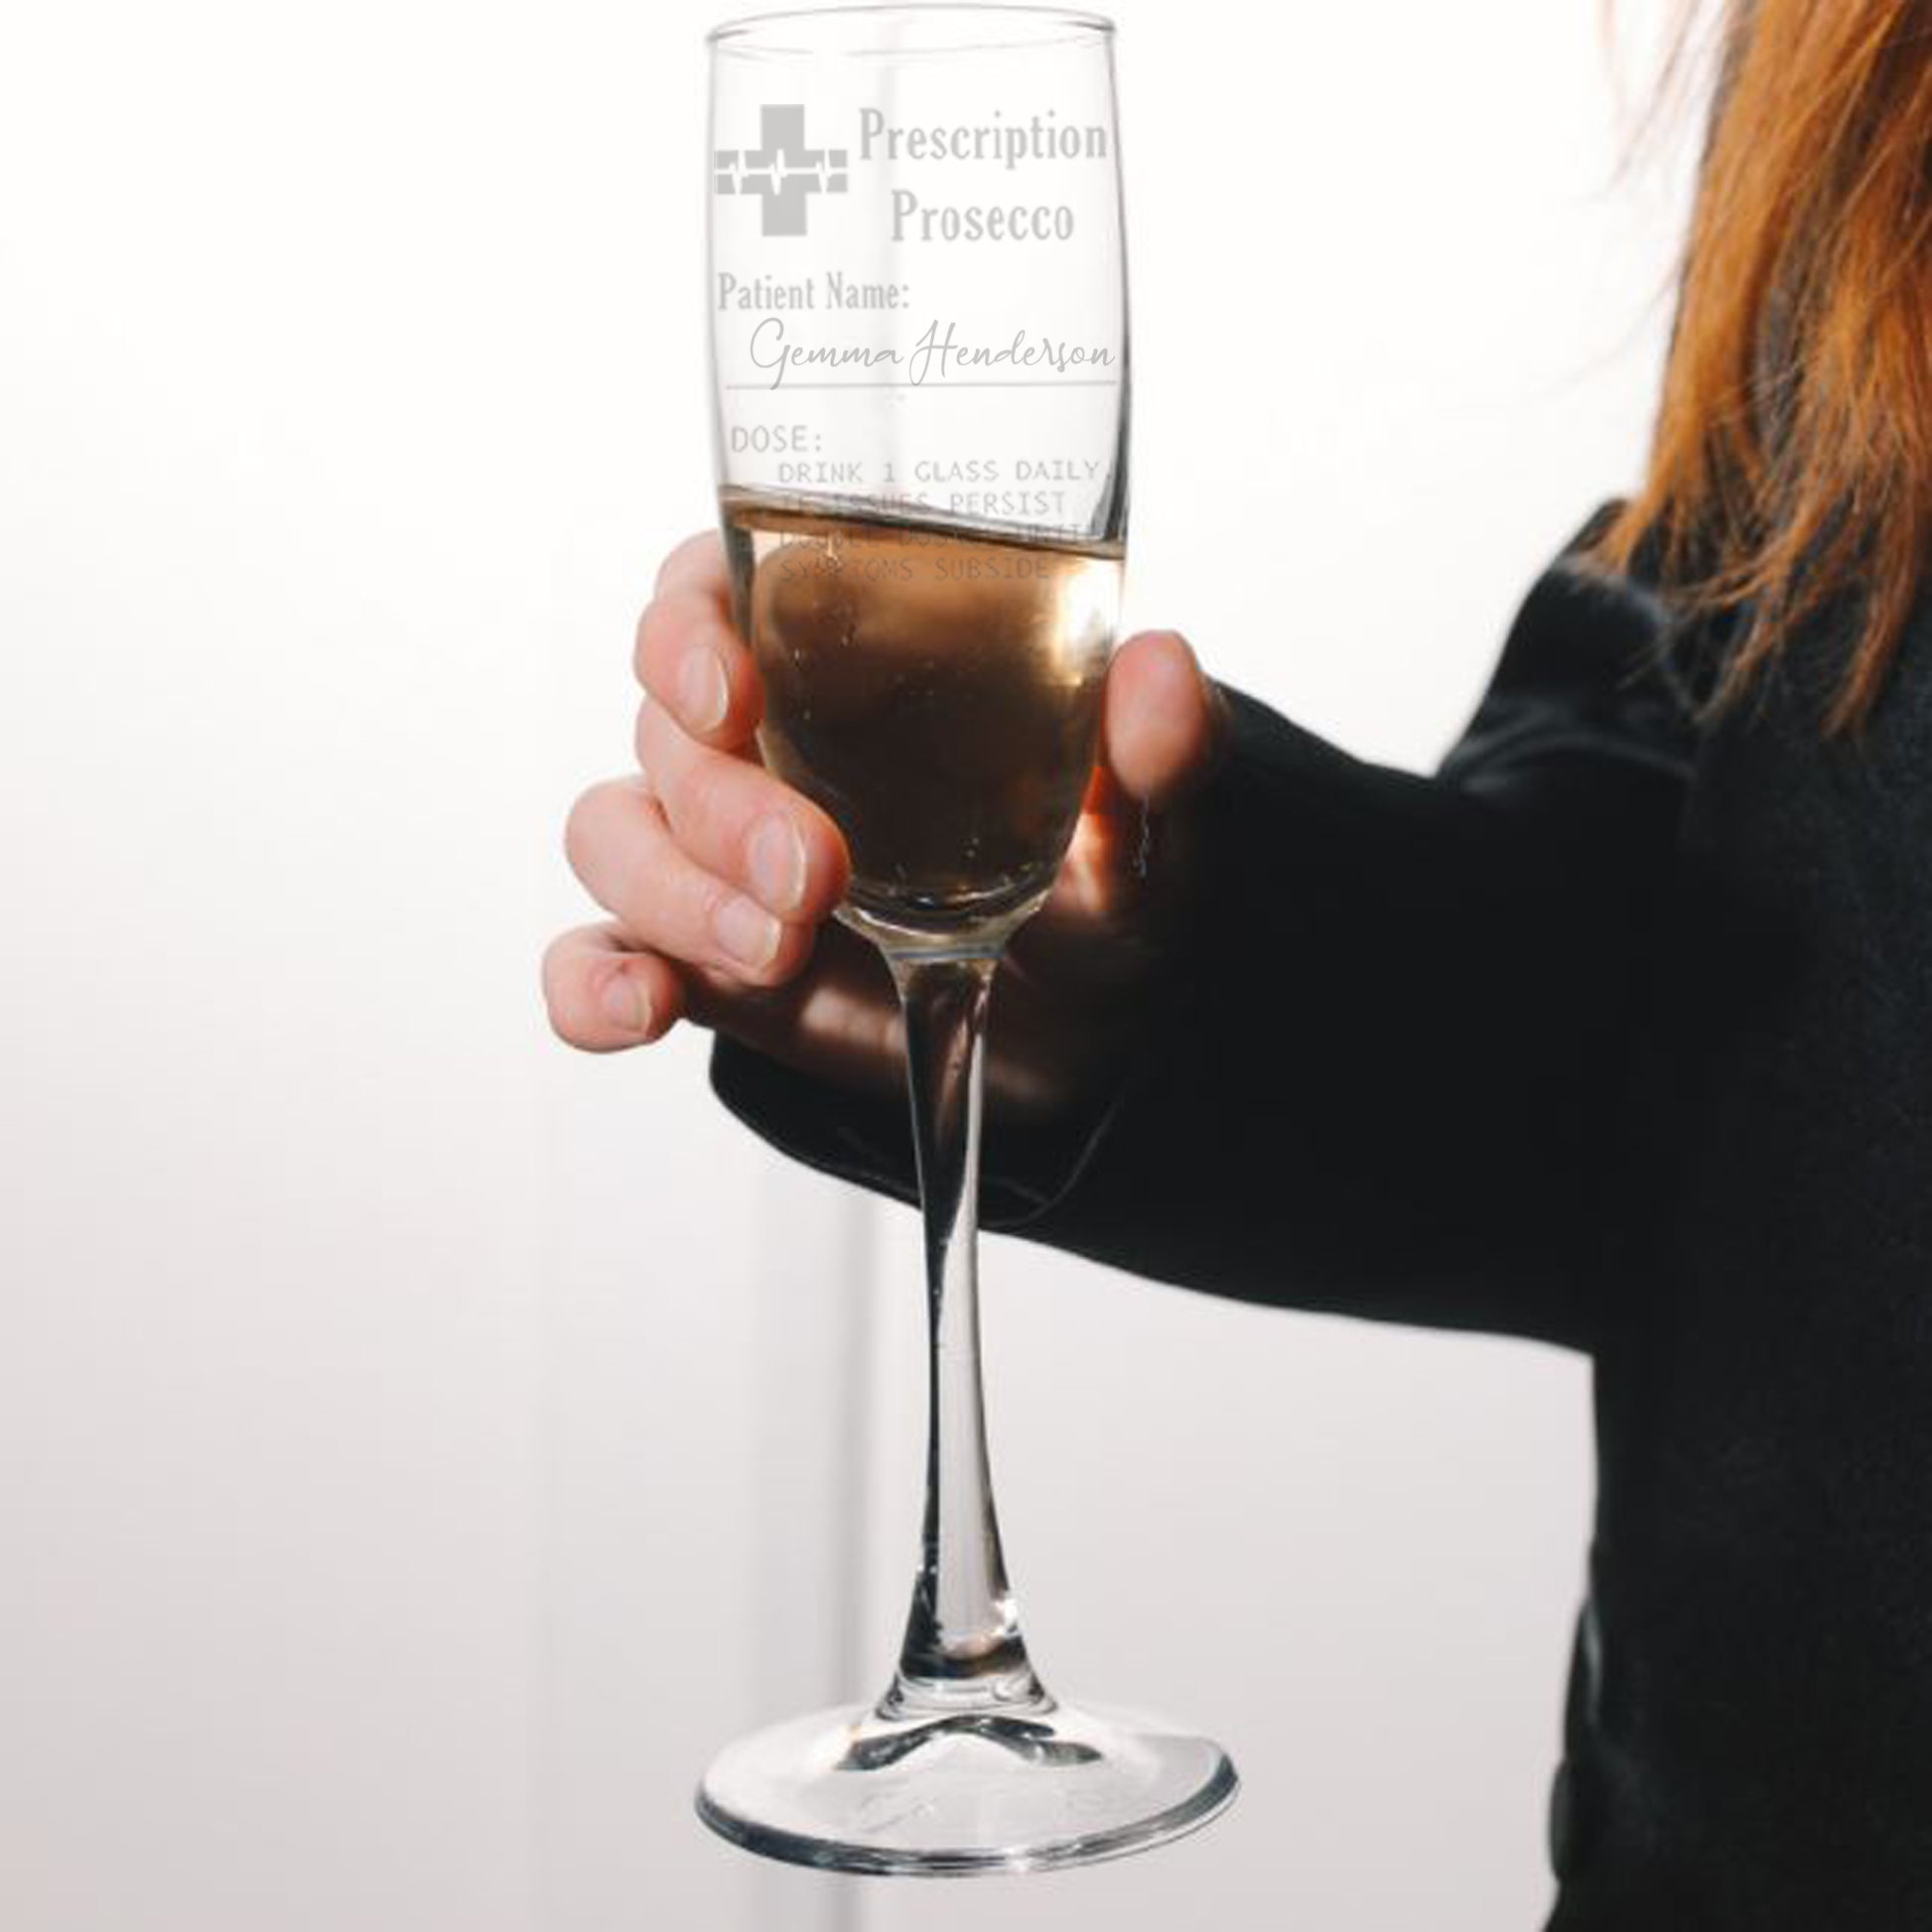 Personalised Engraved Prescription Prosecco Glass Gift  - Always Looking Good -   